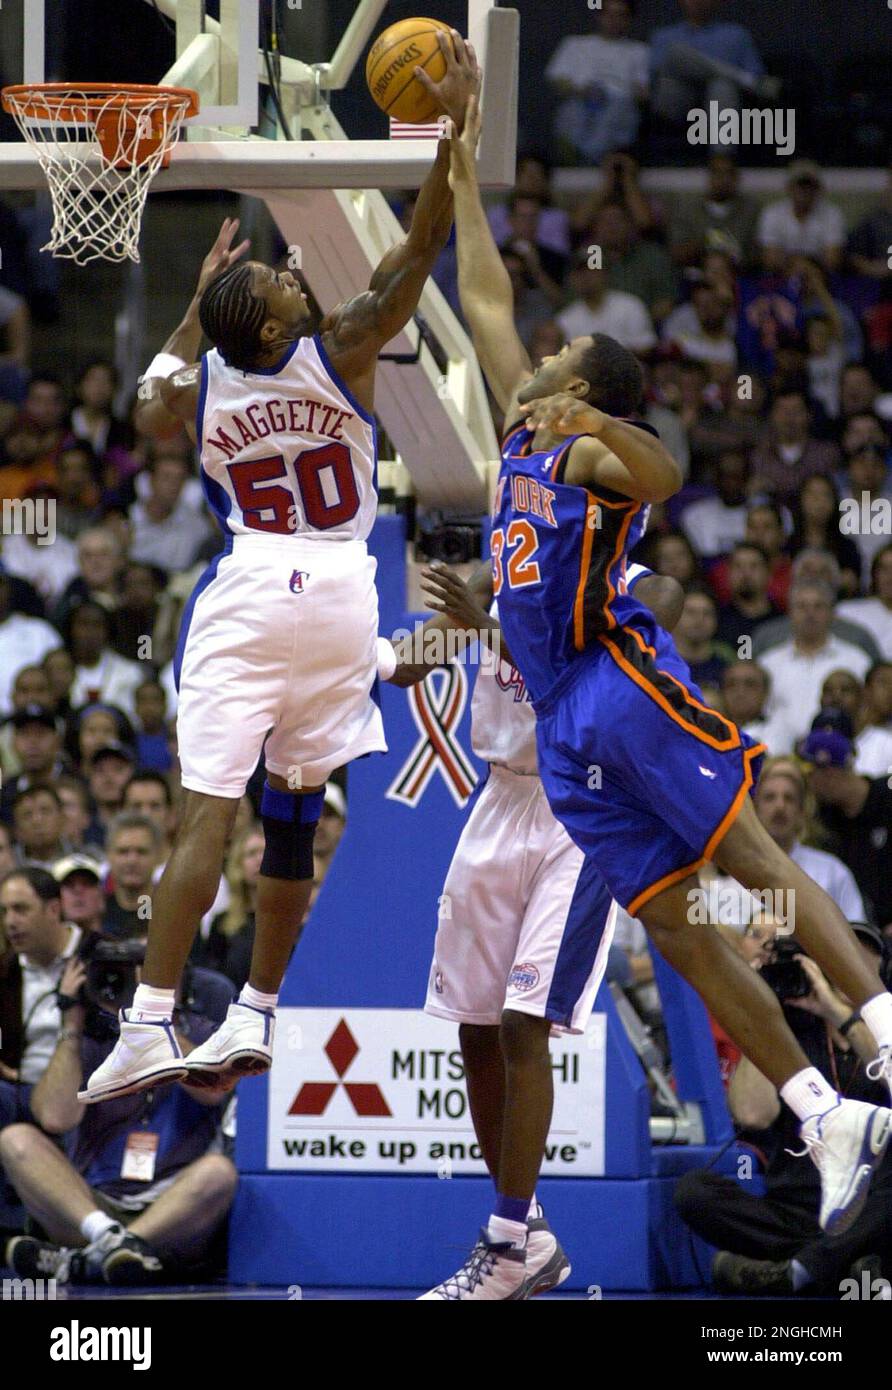 Los Angeles Clippers' Cory Maggette, left, pulls in a rebound over New York  Knicks' Othella Harrington during the first half in Los Angeles, Sunday,  Nov 18, 2001. The Clippers won 99-86. (AP